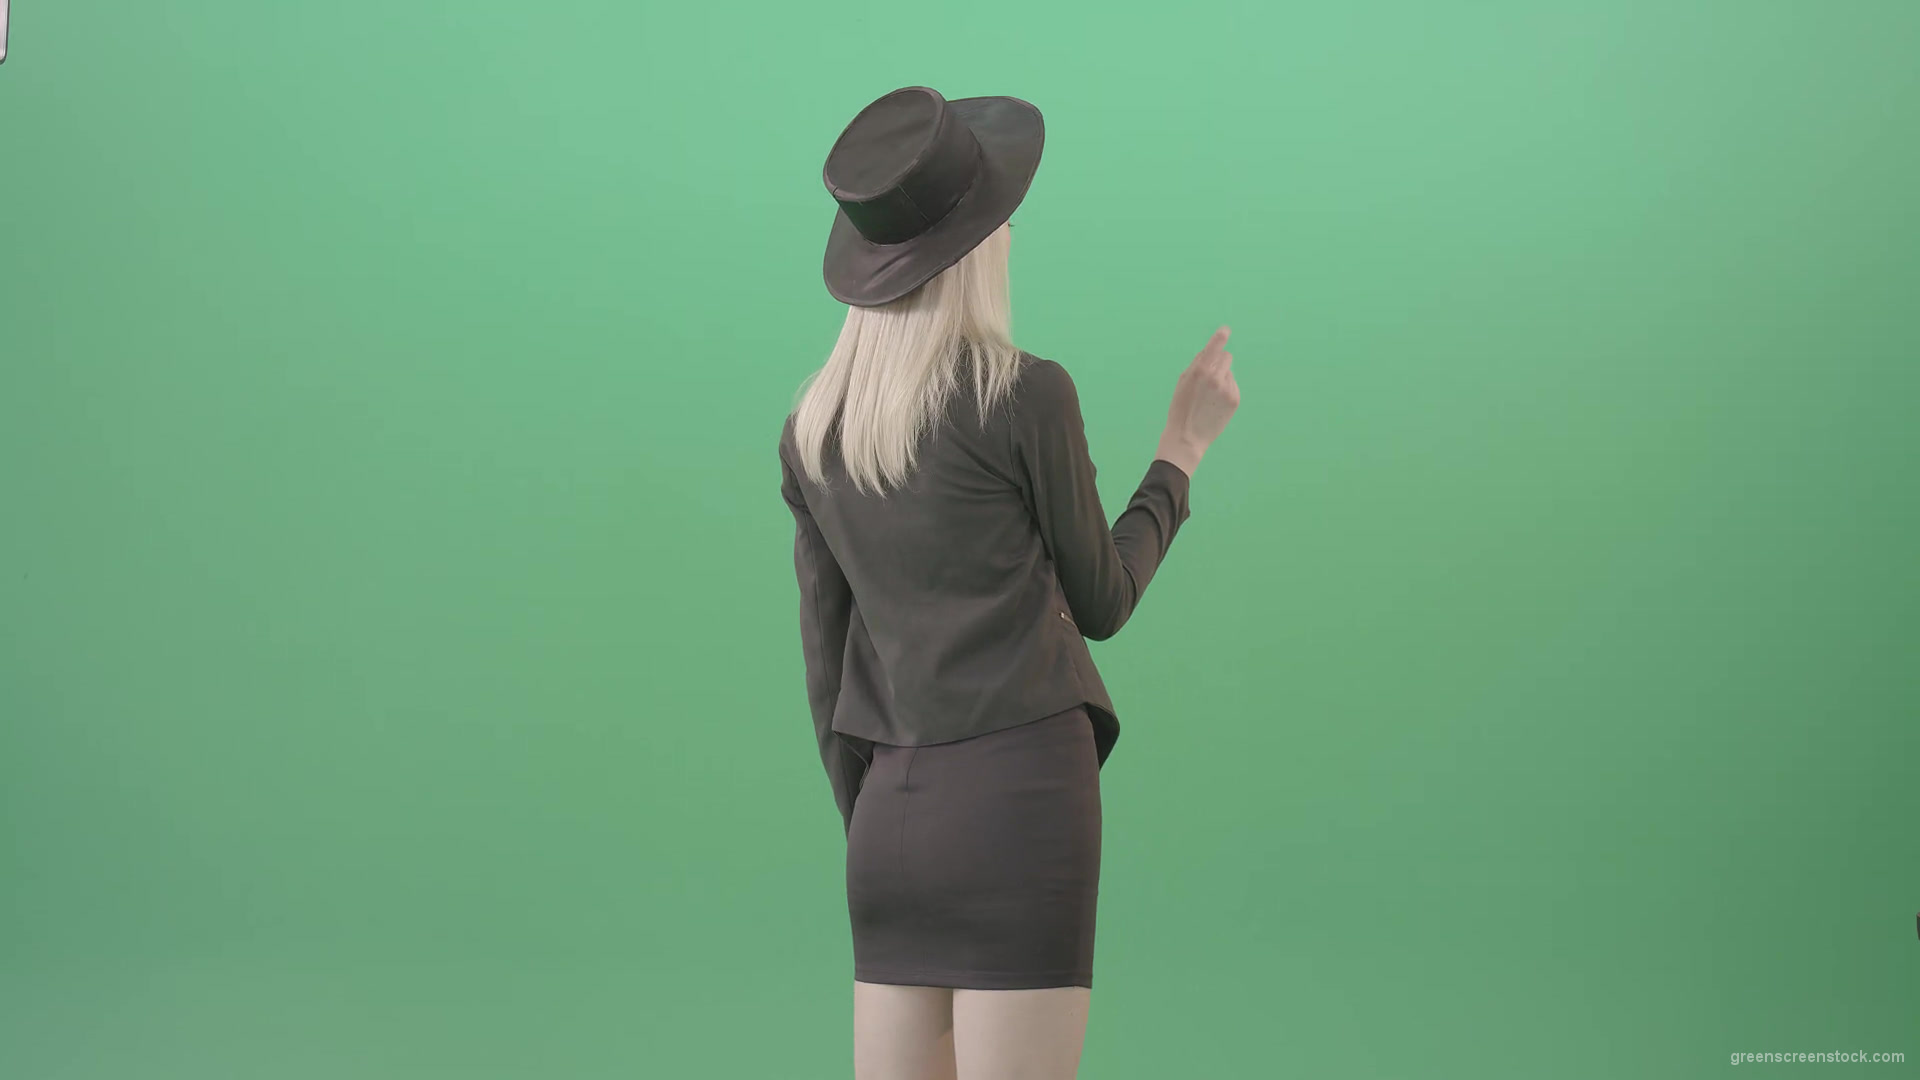 Blonde-Girl-looking-digital-virtual-products-on-touch-screen-from-back-side-4K-Green-Screen-Video-Footage-1920_004 Green Screen Stock